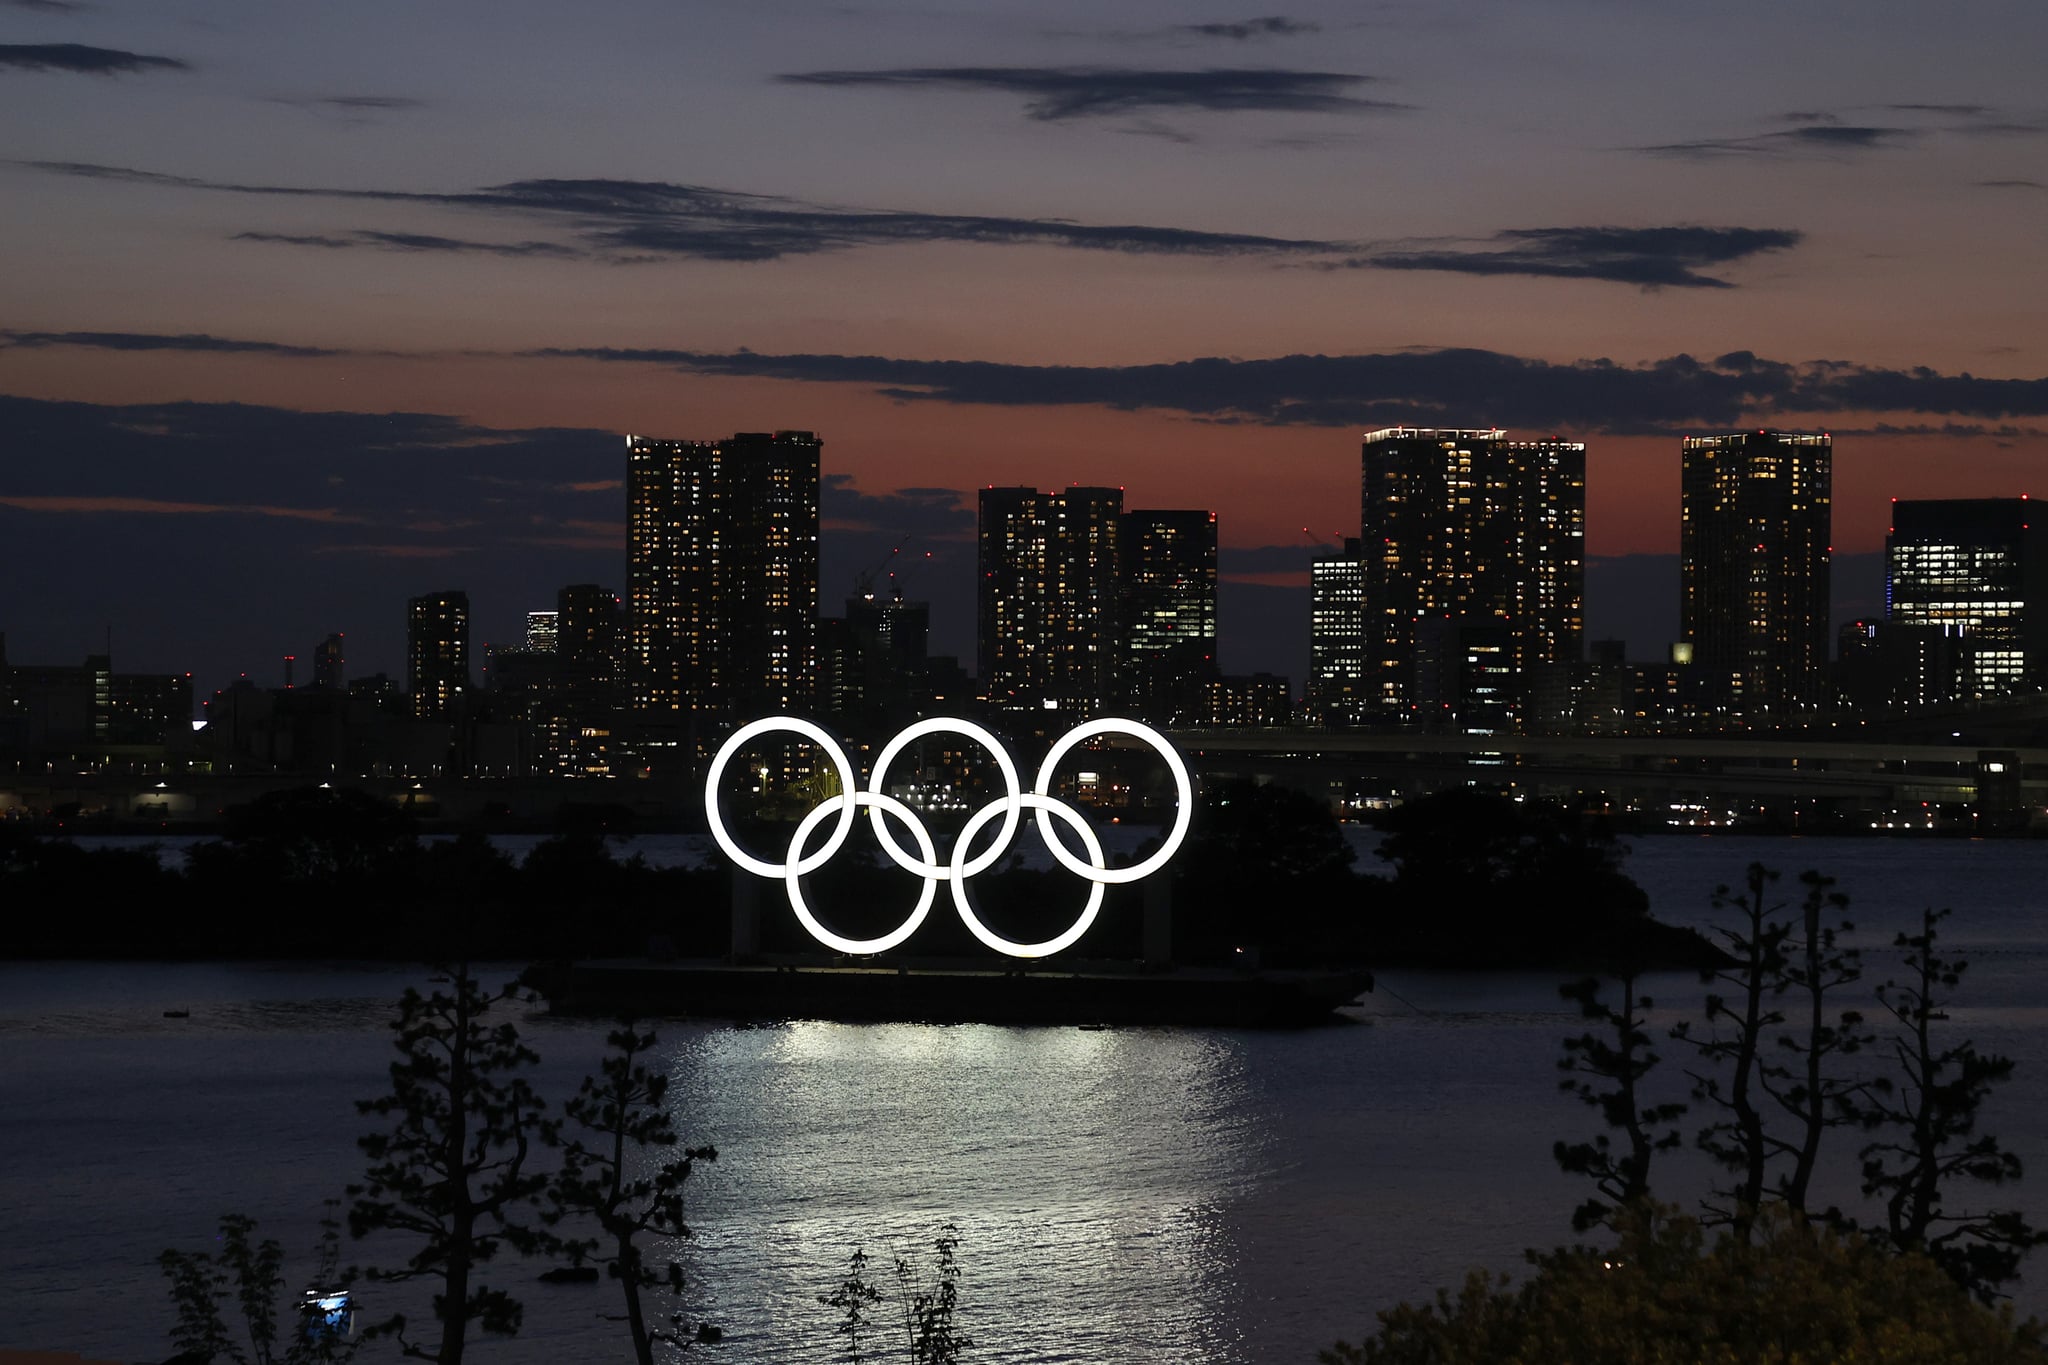 TOKYO, JAPAN - JULY 19: The Olympic Rings are displayed by the Odaiba Marine Park Olympic venue ahead of the Tokyo 2020 Olympic Games on July 19, 2021 in Tokyo, Japan. (Photo by Toru Hanai/Getty Images)